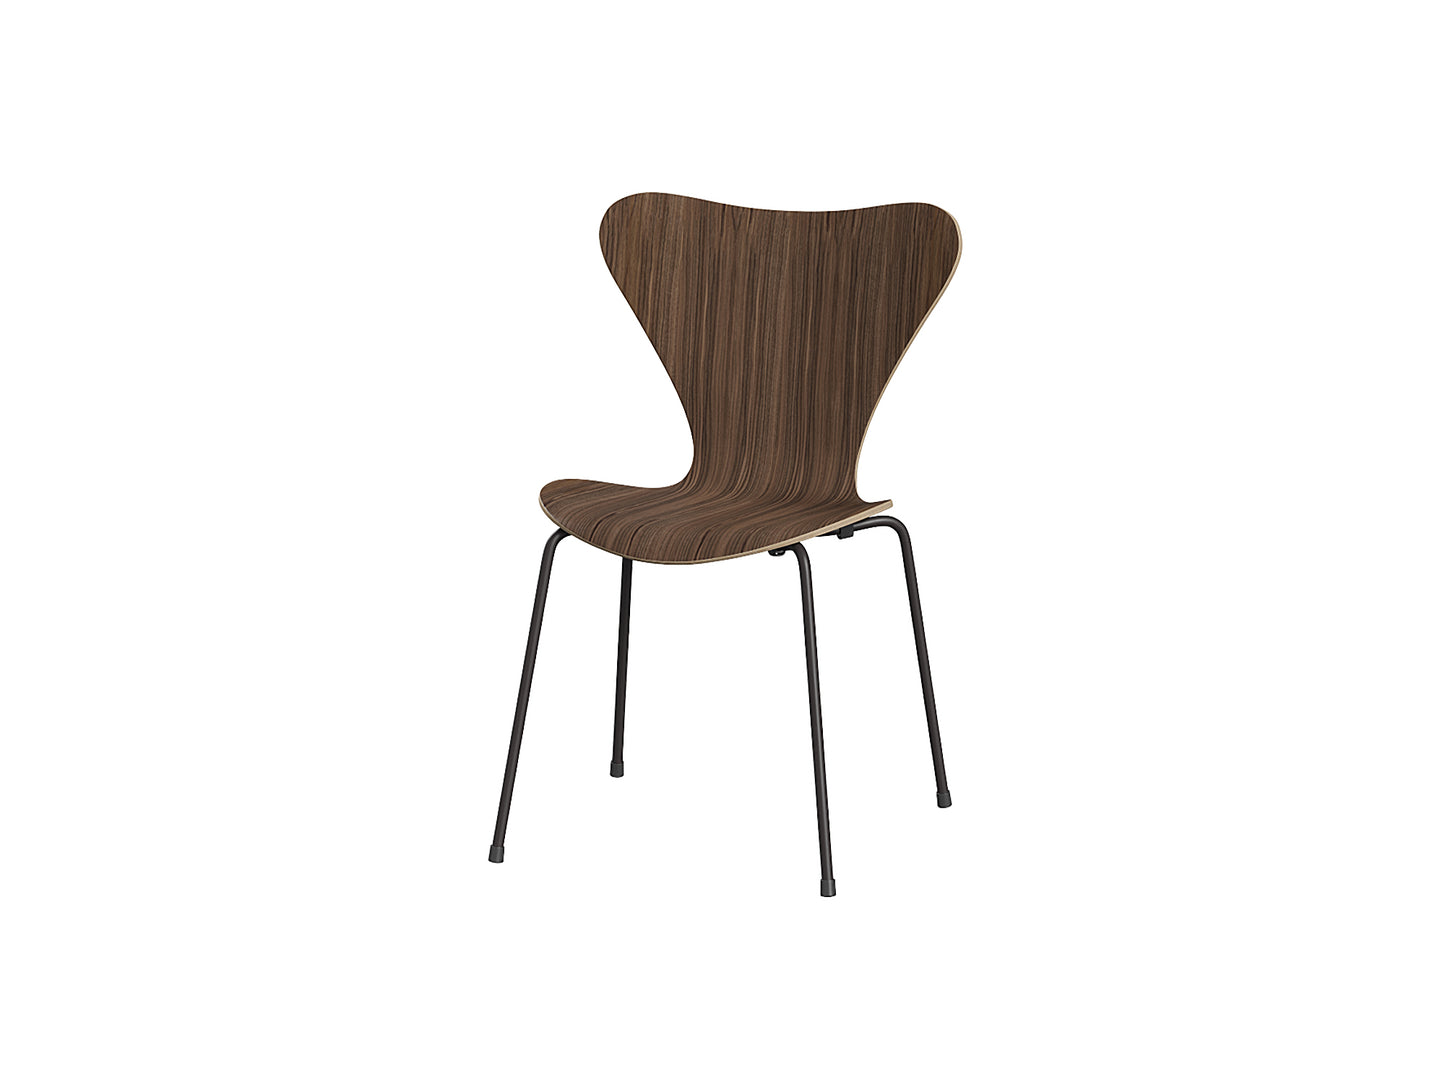 Series 7 Dining Chair (Clear Lacquered Wood) by Fritz Hanse - Walnut / Warm Graphite Steel